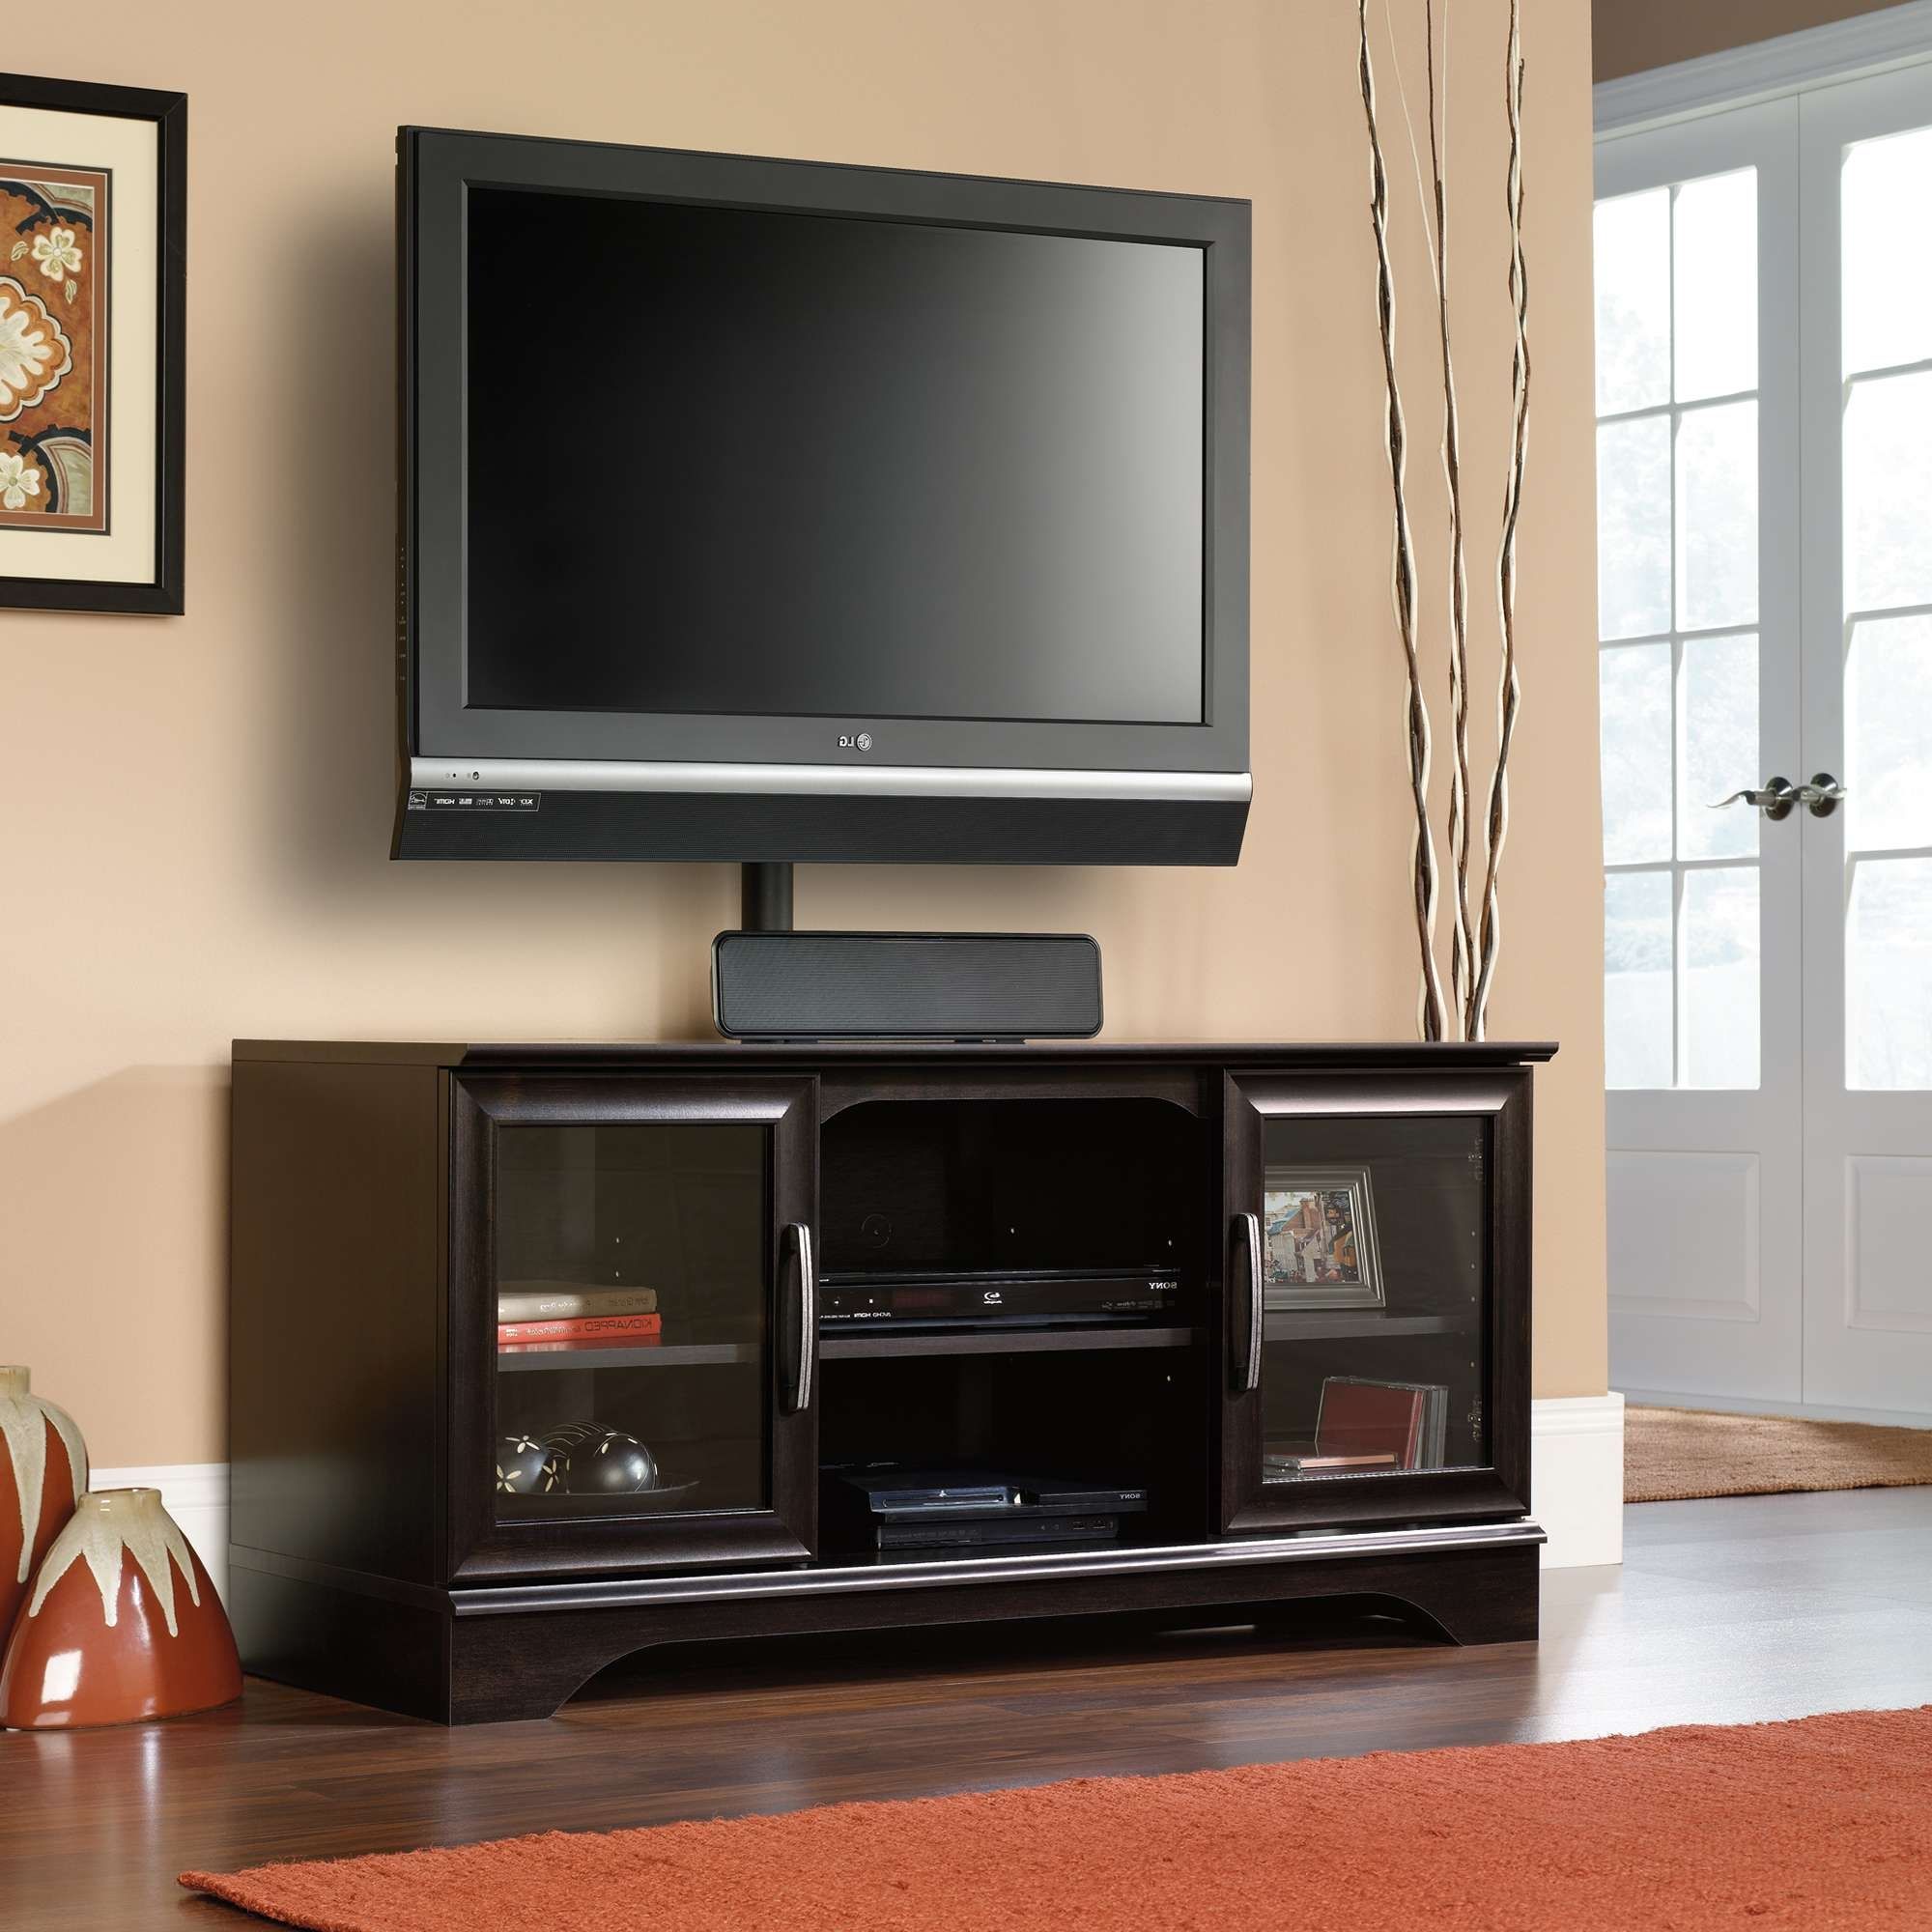 Furniture Entertainment Centers For Inch Tver Stand Stands Wall Regarding Wall Mounted Tv Stands Entertainment Consoles (View 9 of 15)